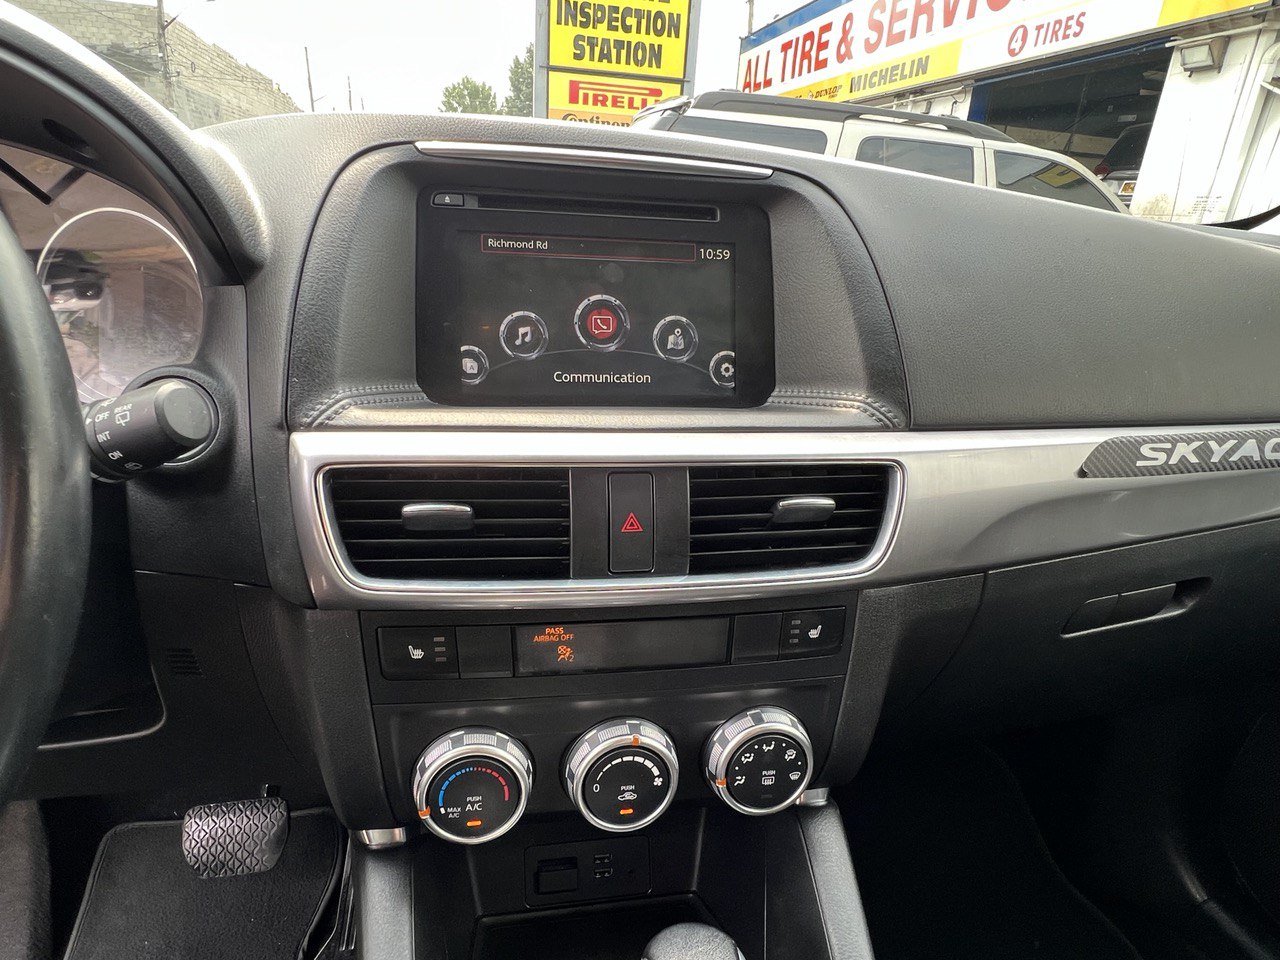 Used - Mazda CX-5 Touring SUV for sale in Staten Island NY